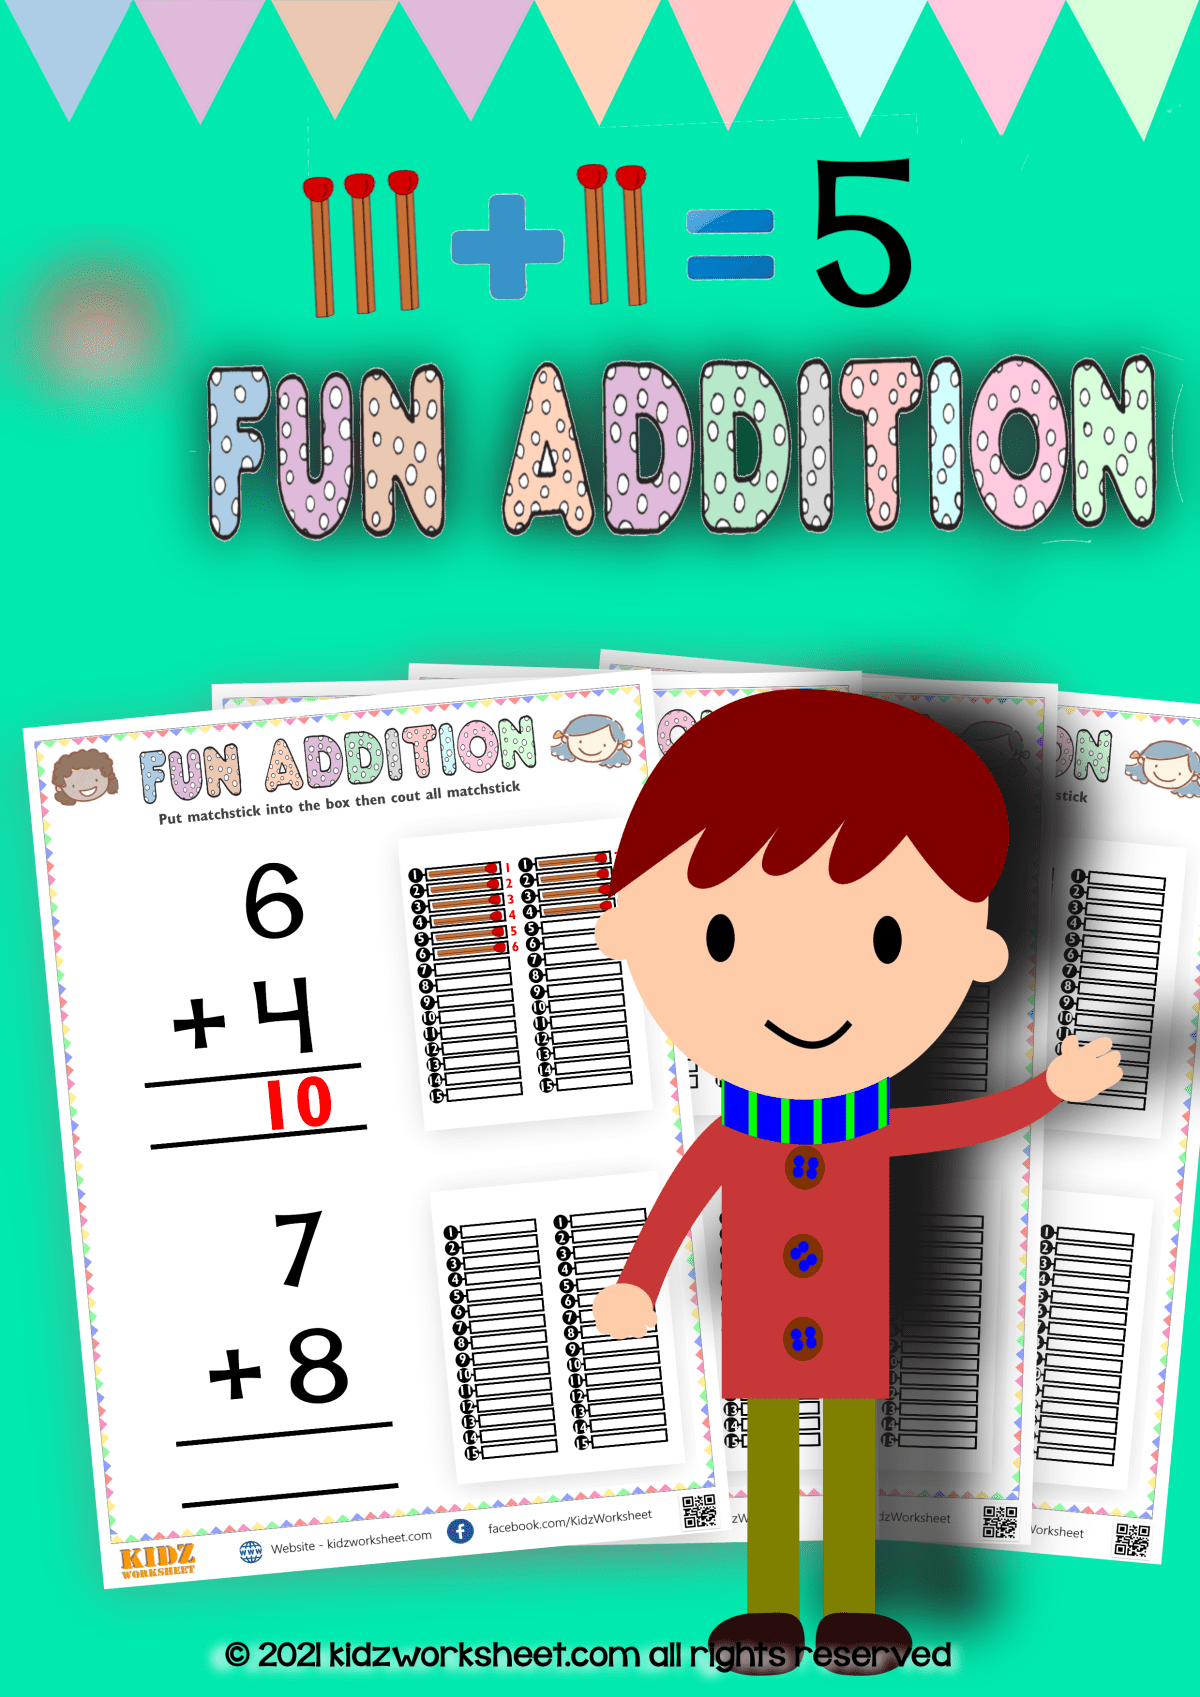 Learn Addition with fun Addition with matchstick worksheet